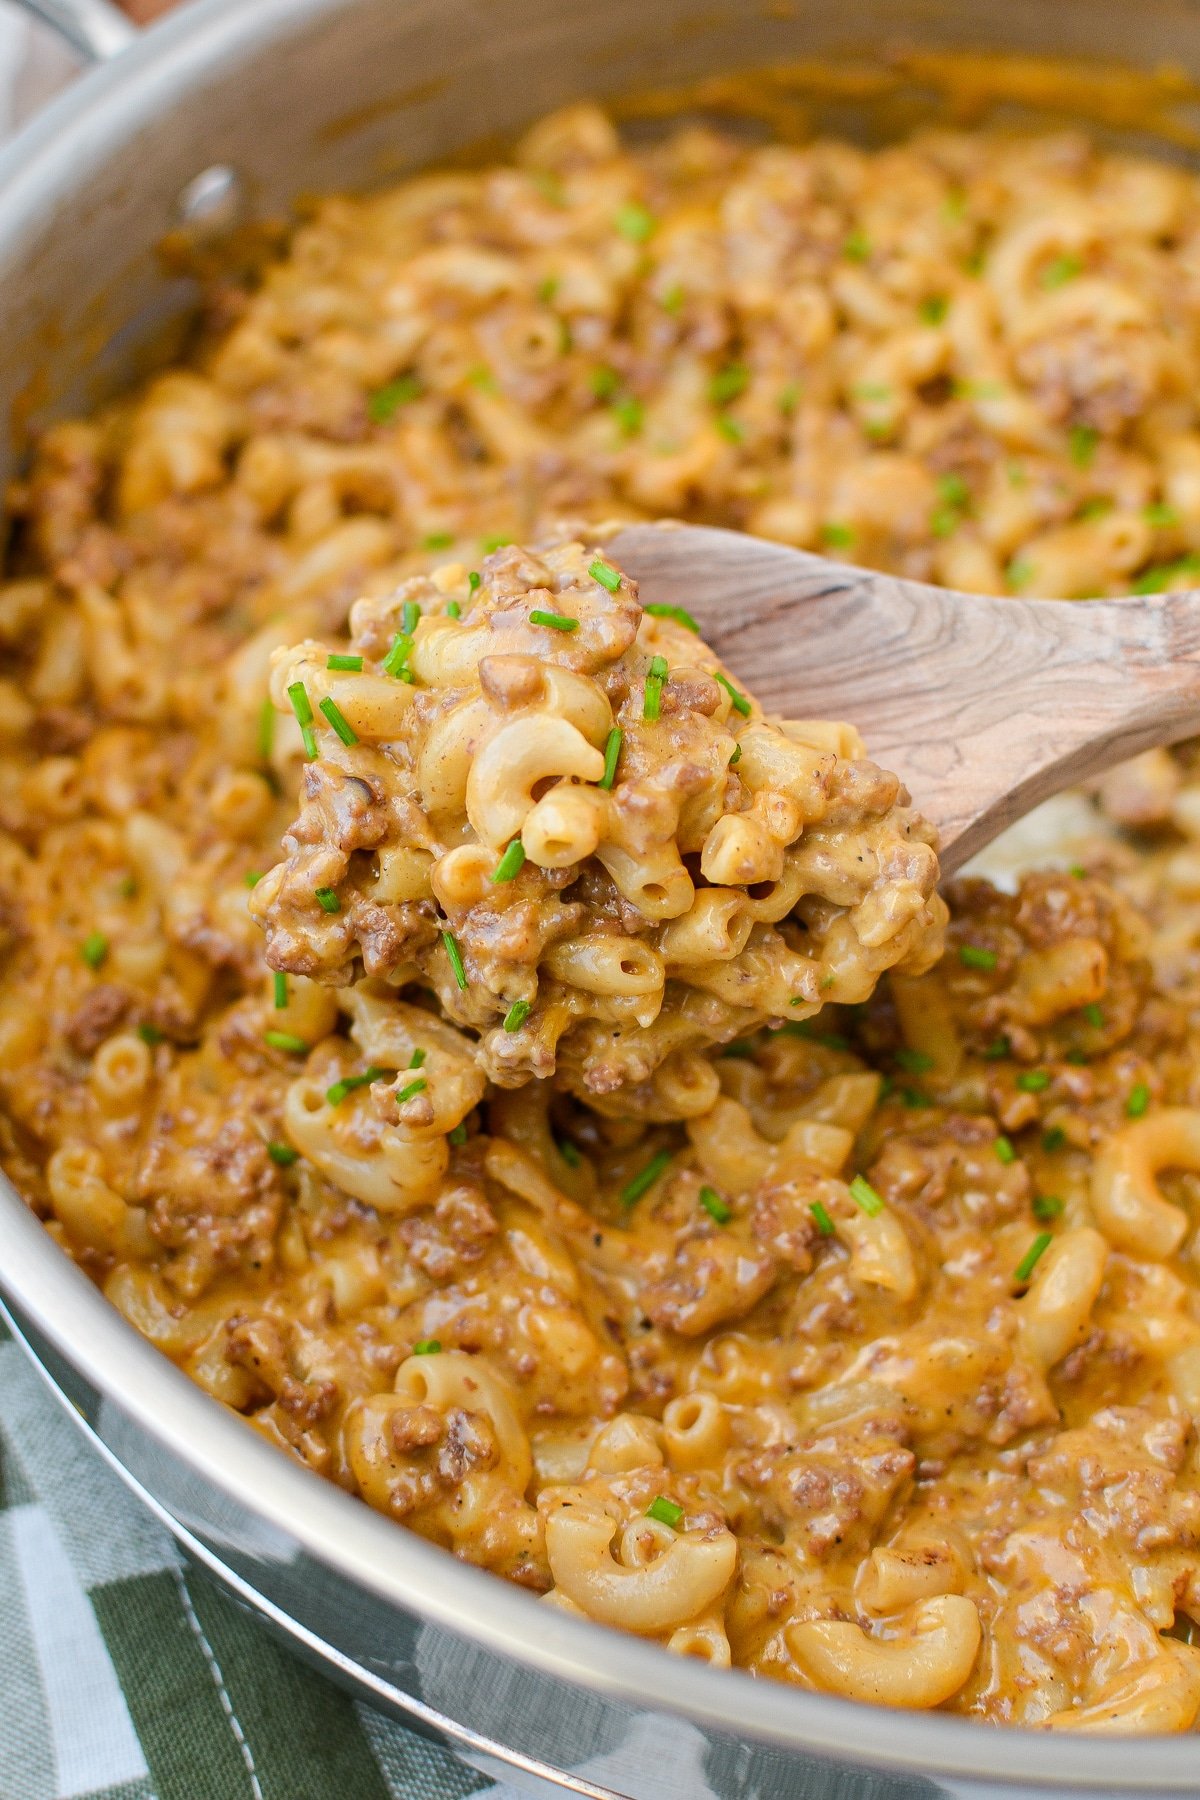 Scooping up a portion of hamburger helper from a skillet.